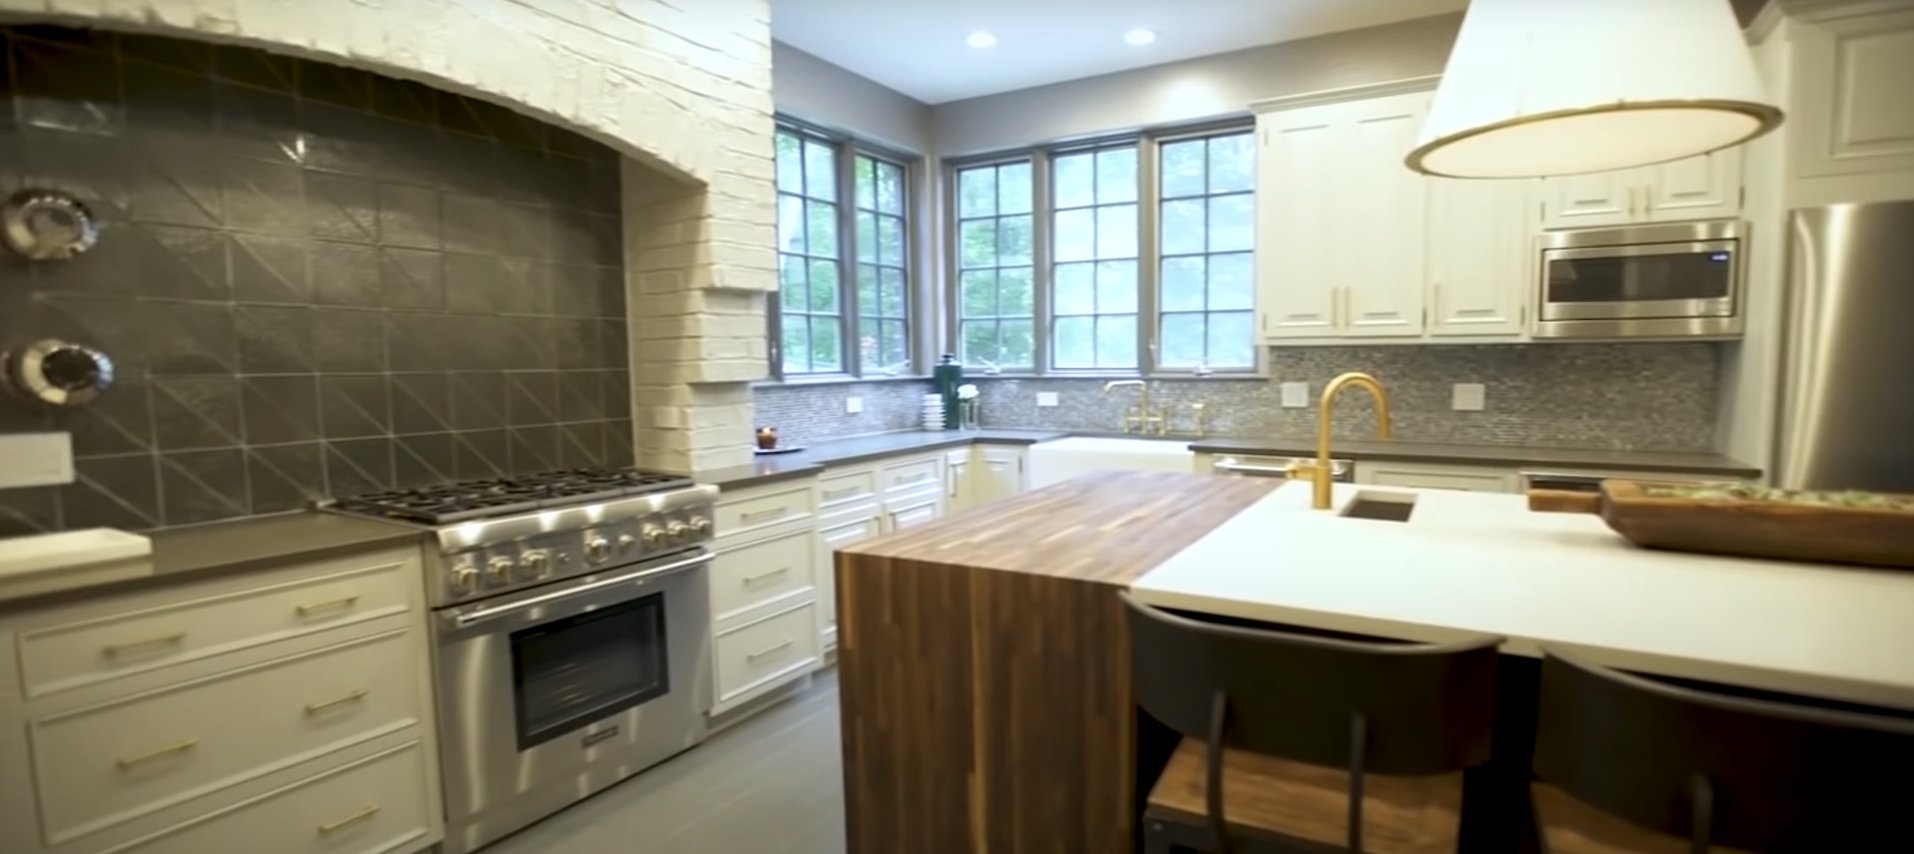 Picture of the interior kitchen design of Wahlberg and McCarthy's home | Source: YouTube/People